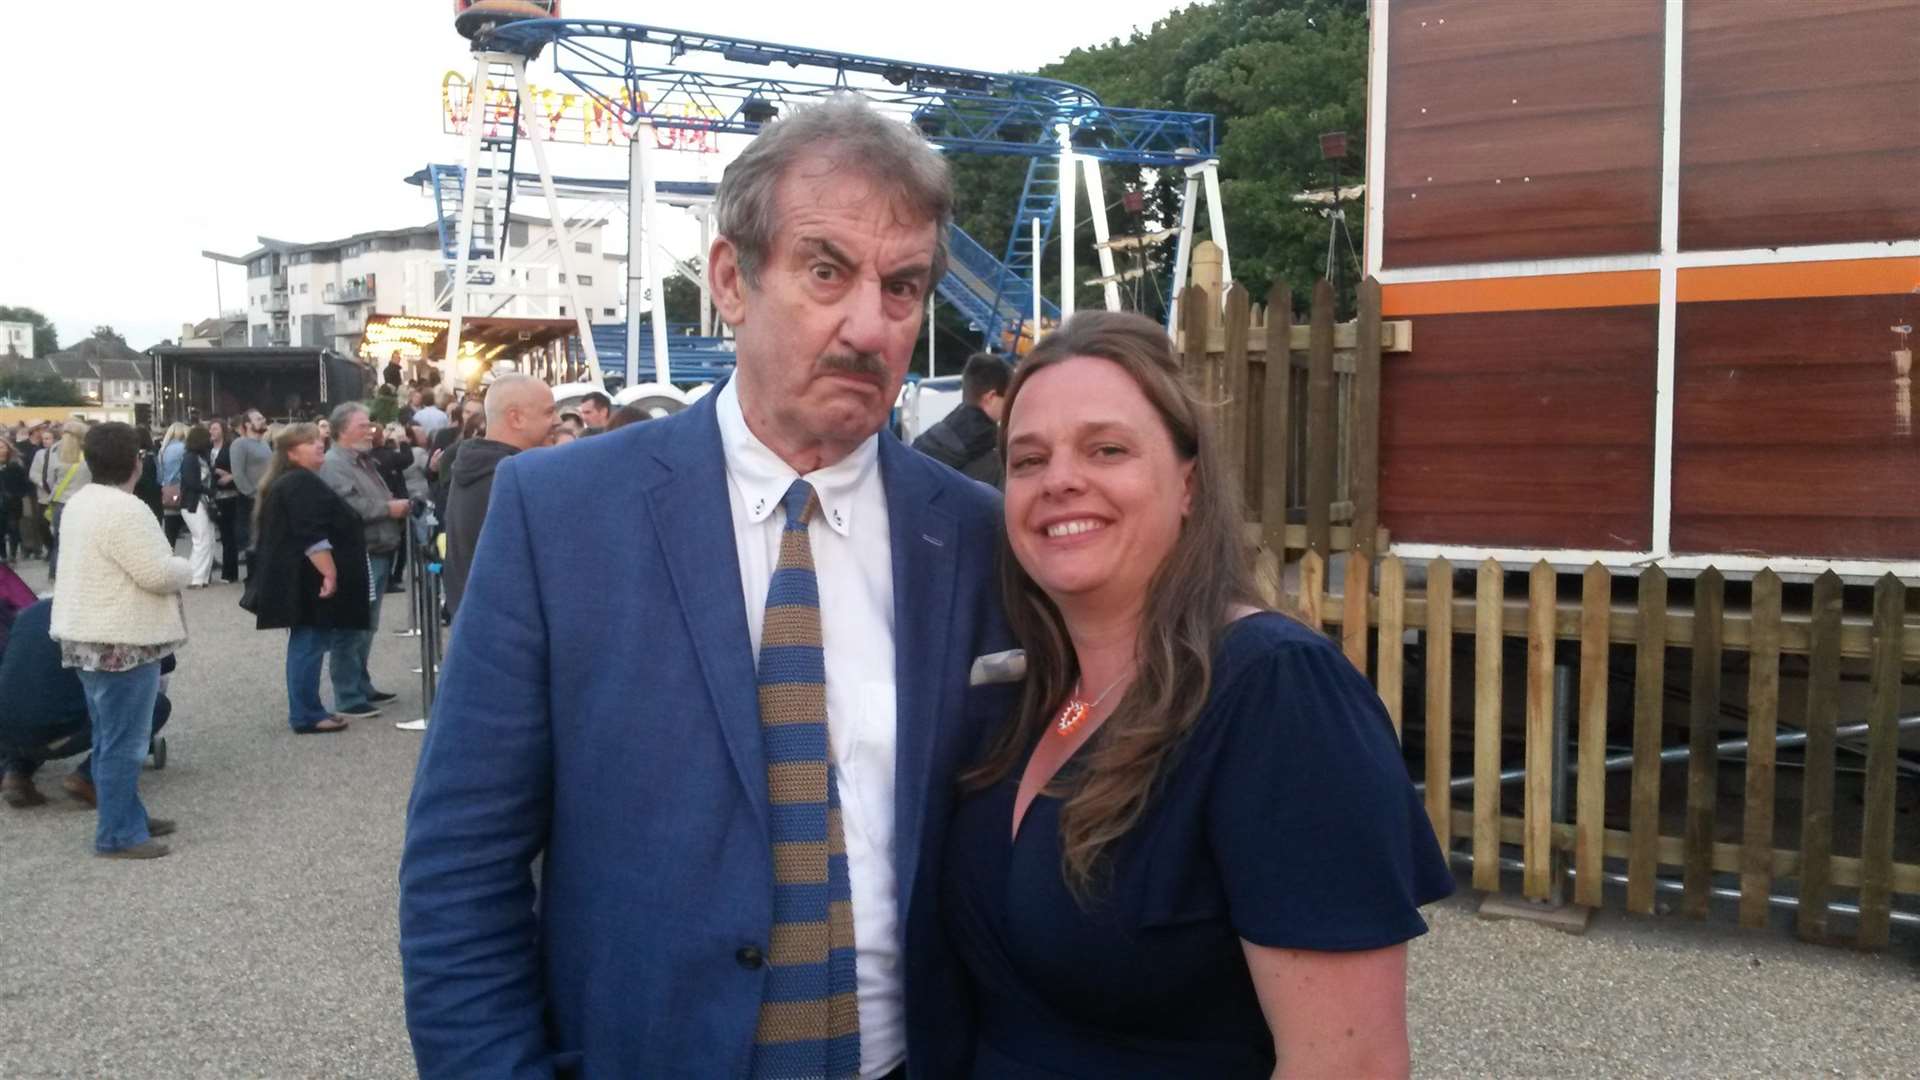 Eddie Kemsley with John 'Boycie' Challis from Only Fools and Horses at Dreamland